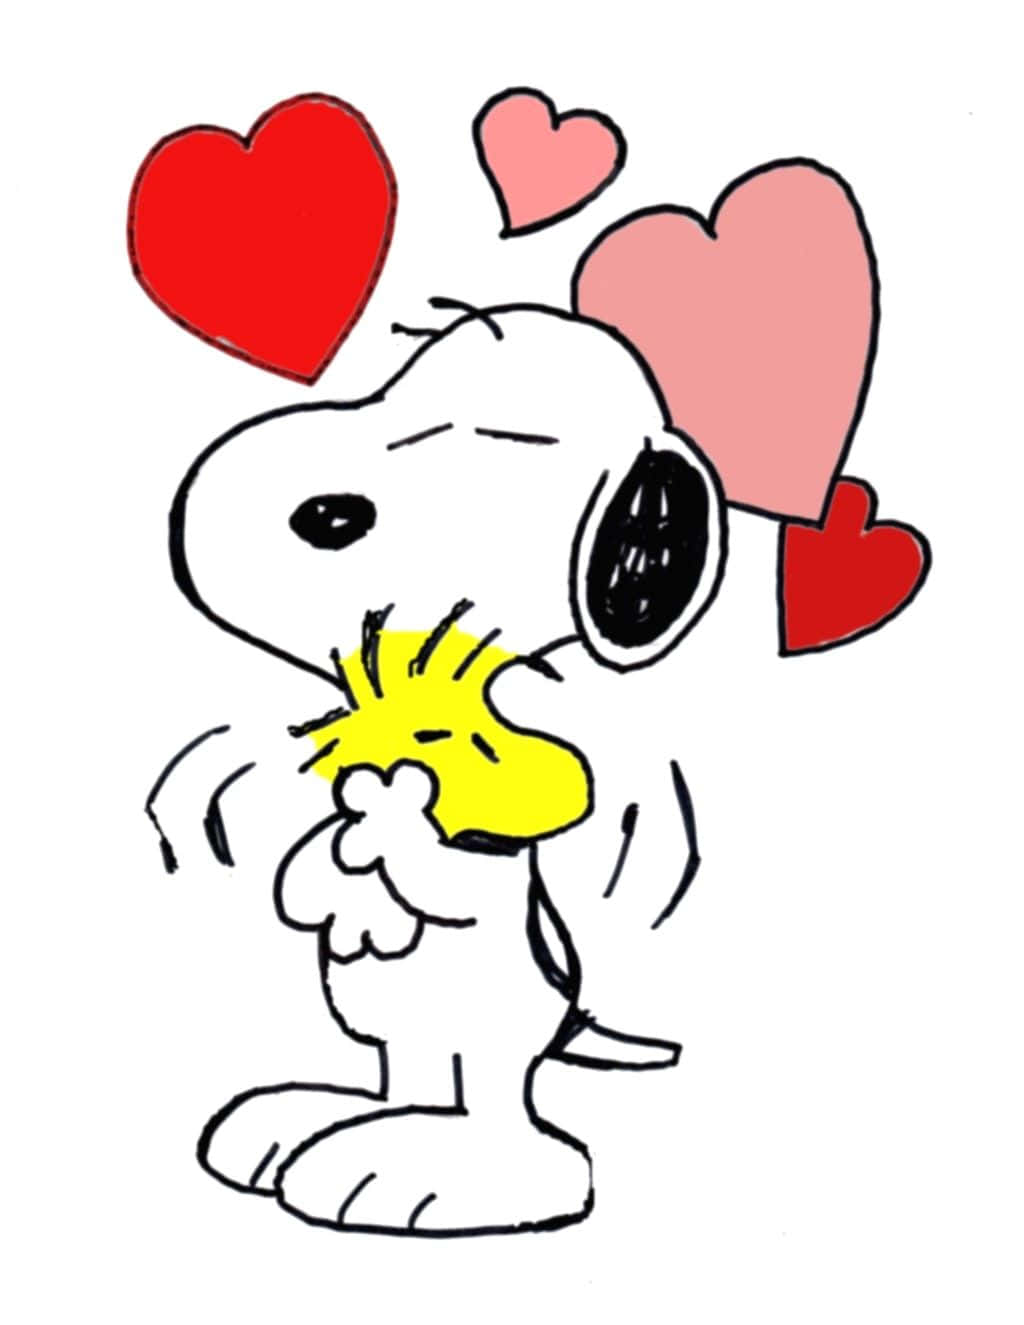 Snoopy Valentine Hugging Woodstock And Hearts Background